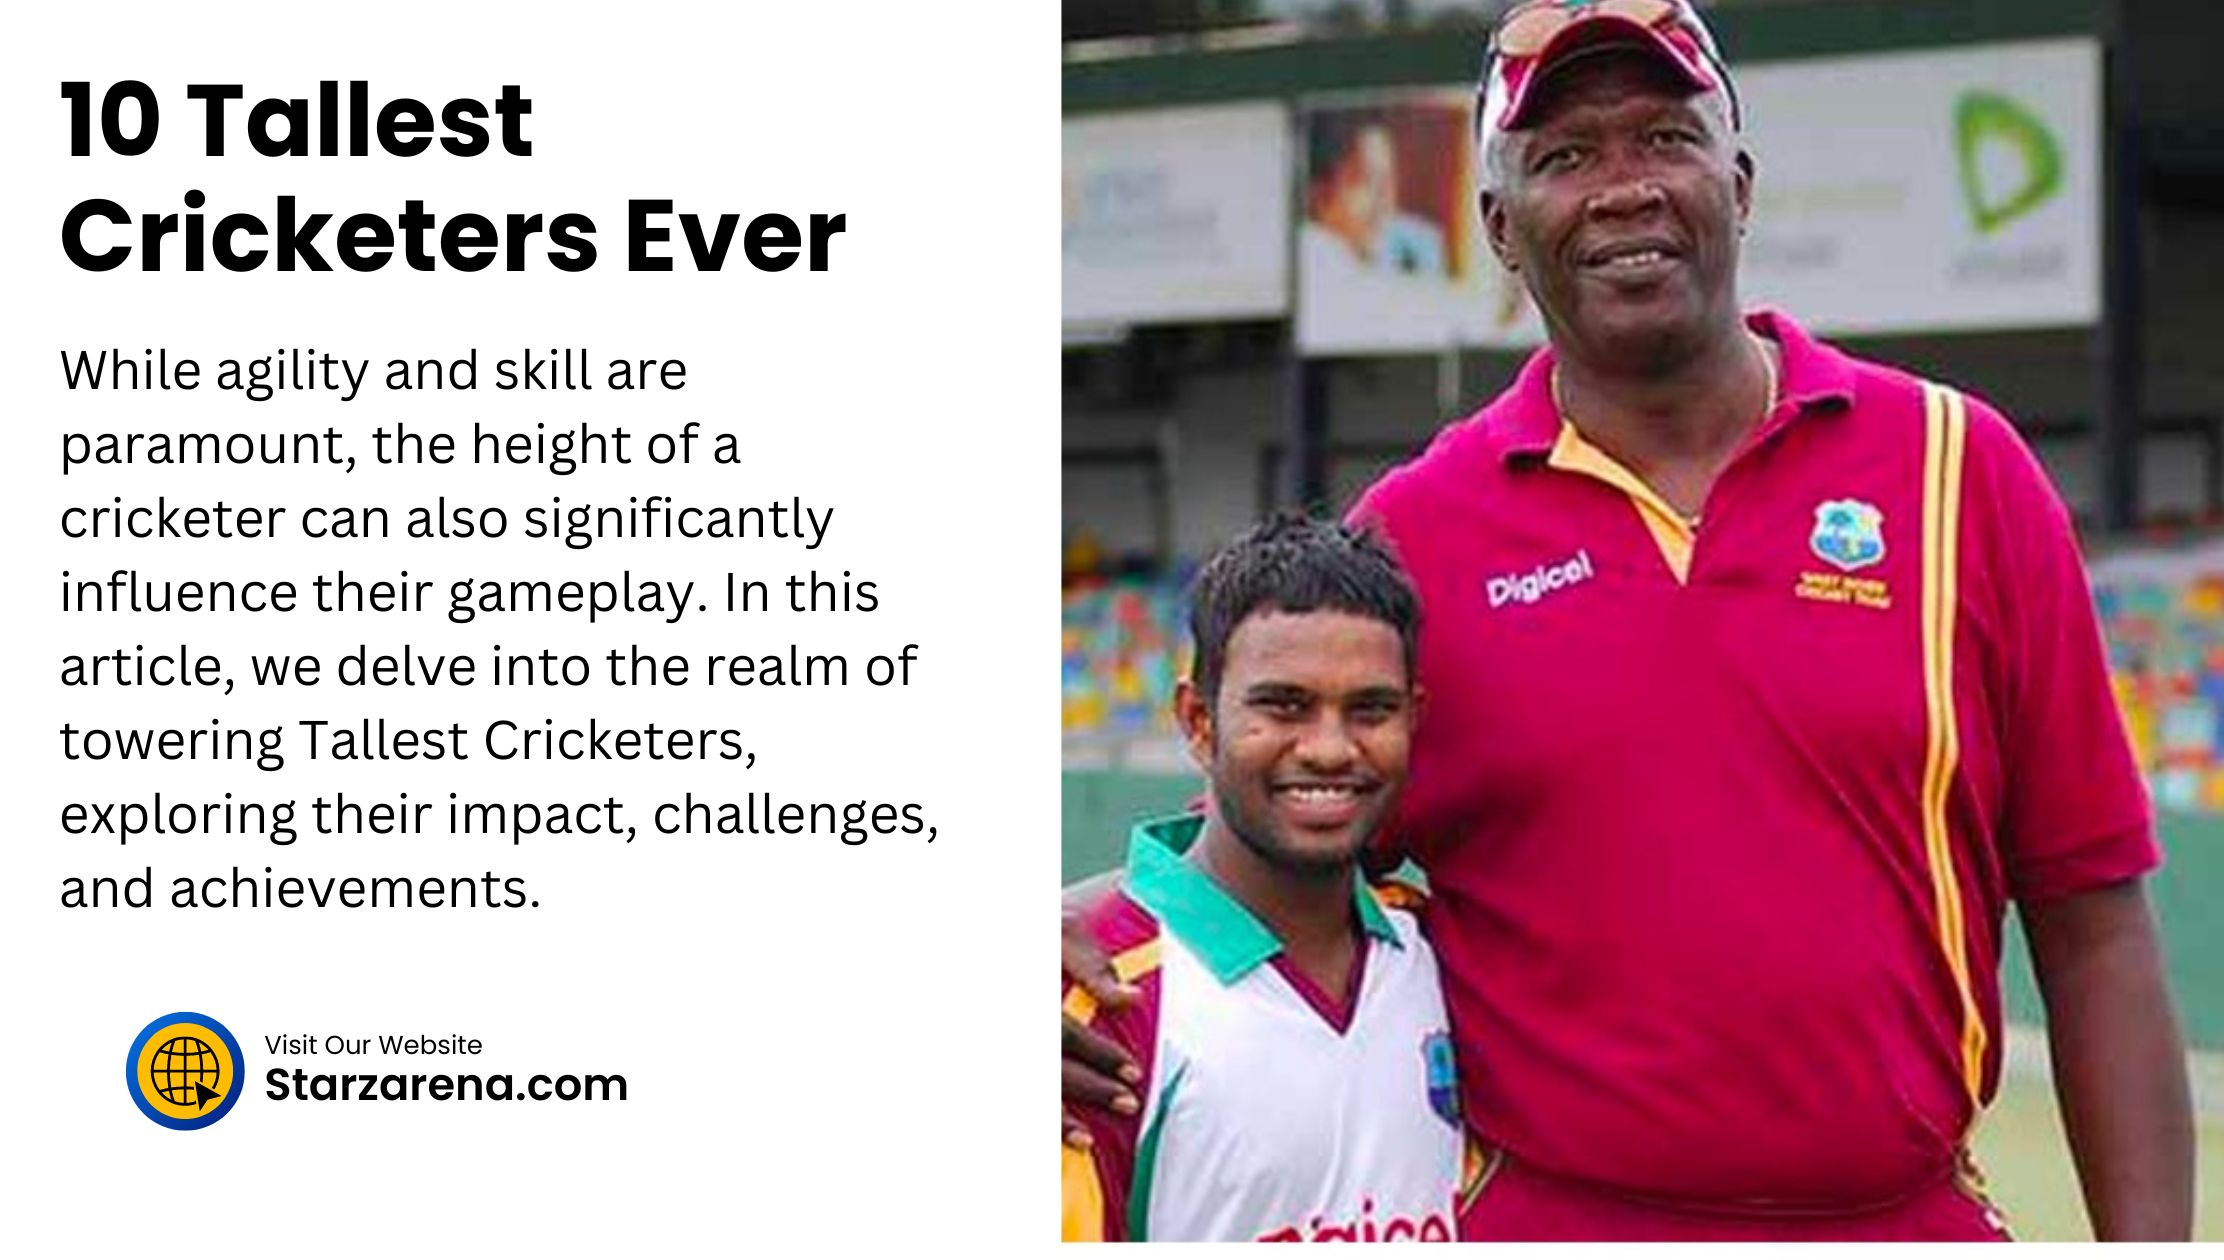 10 Tallest Cricketers